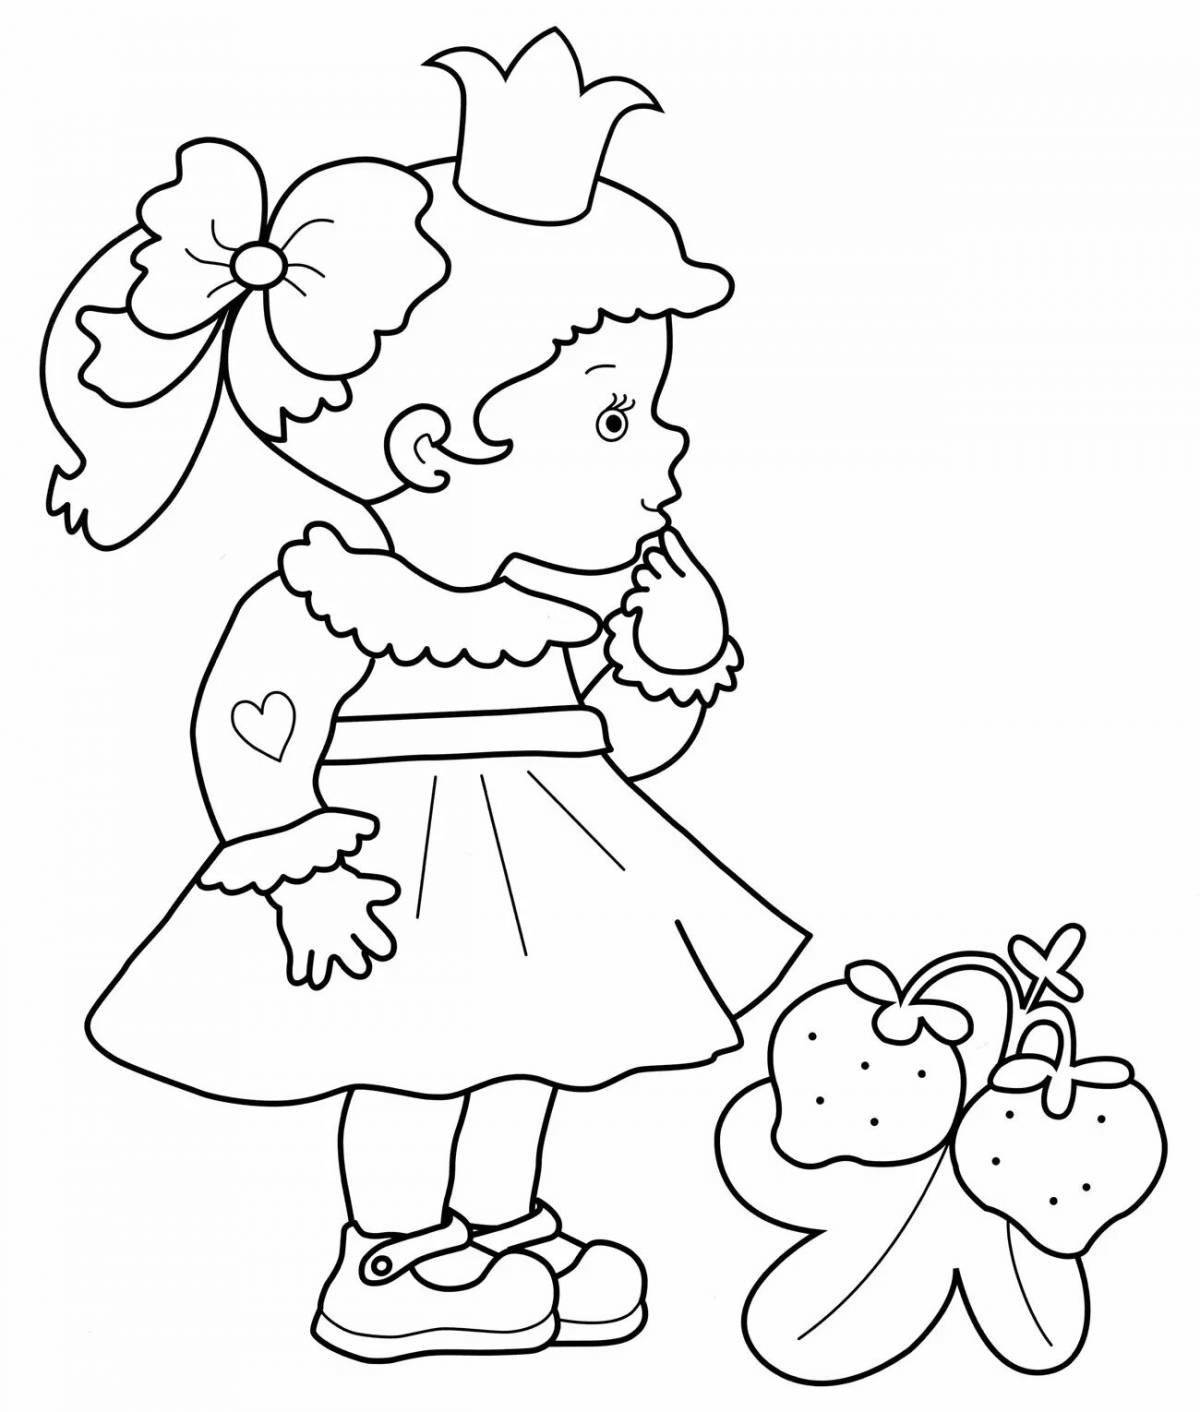 Adorable coloring doll for 5-6 year olds